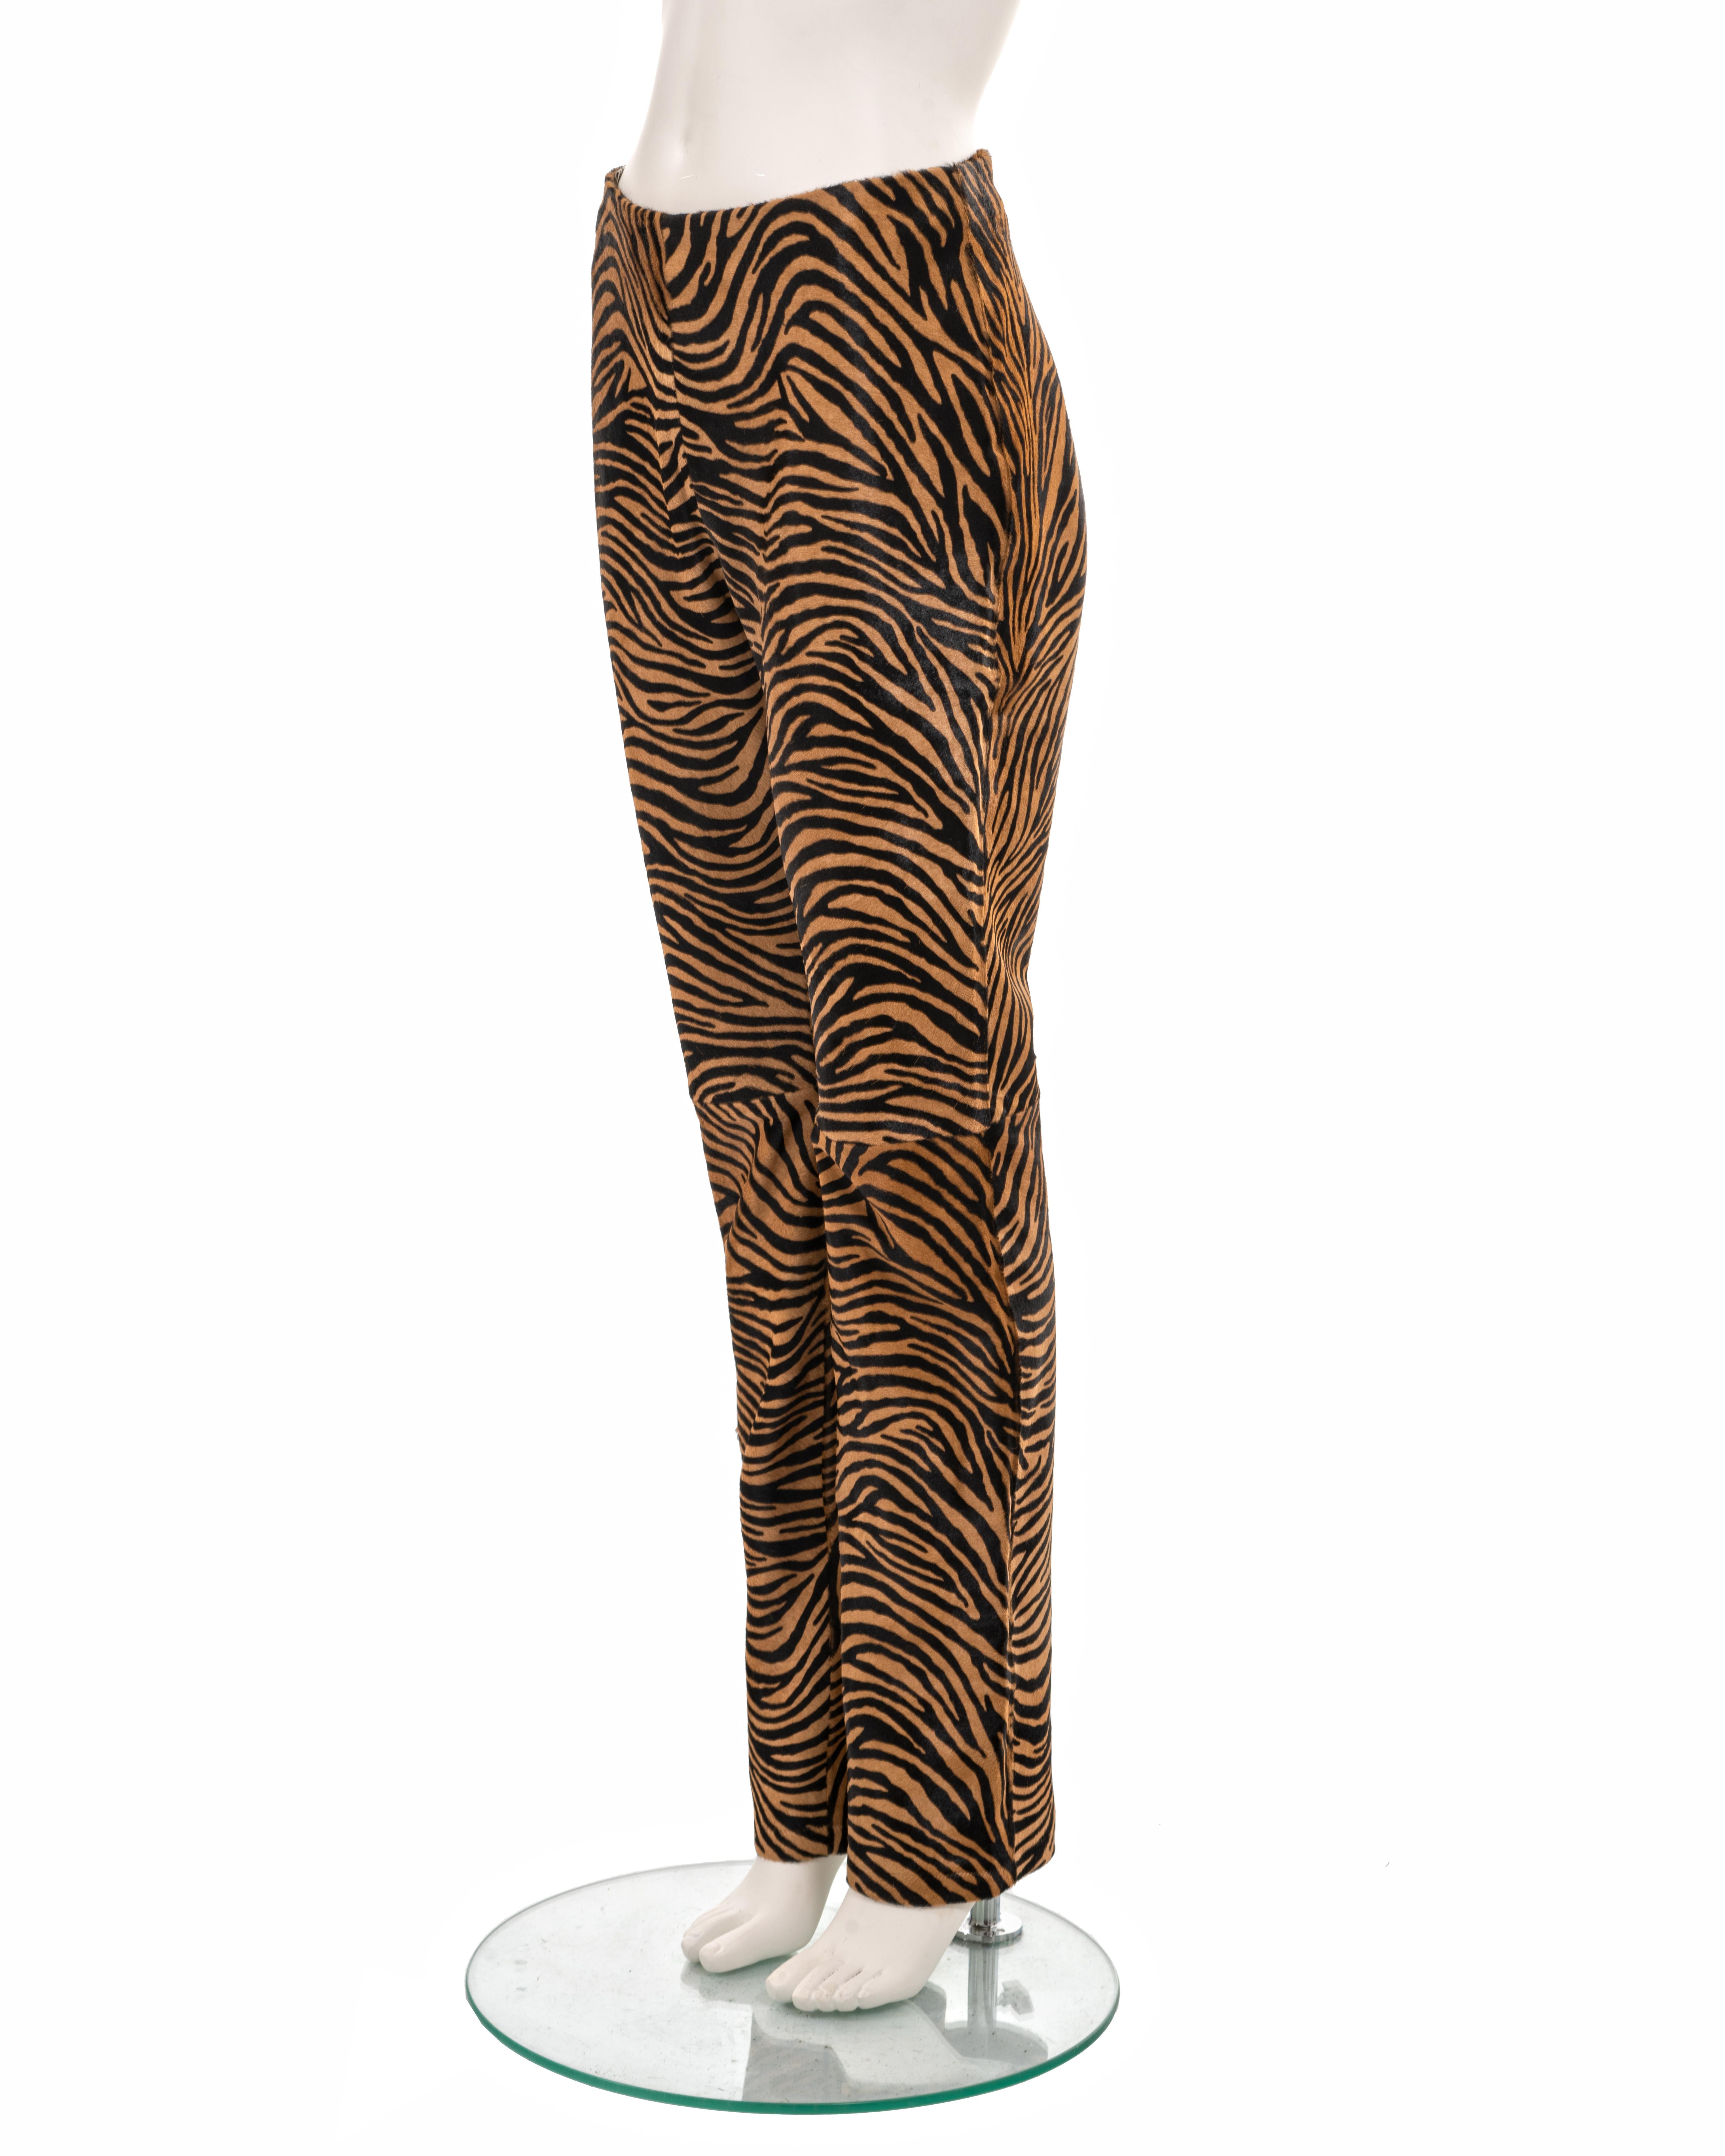 Gianni Versace tiger-print pony hair leather pants, fw 1999 For Sale 3